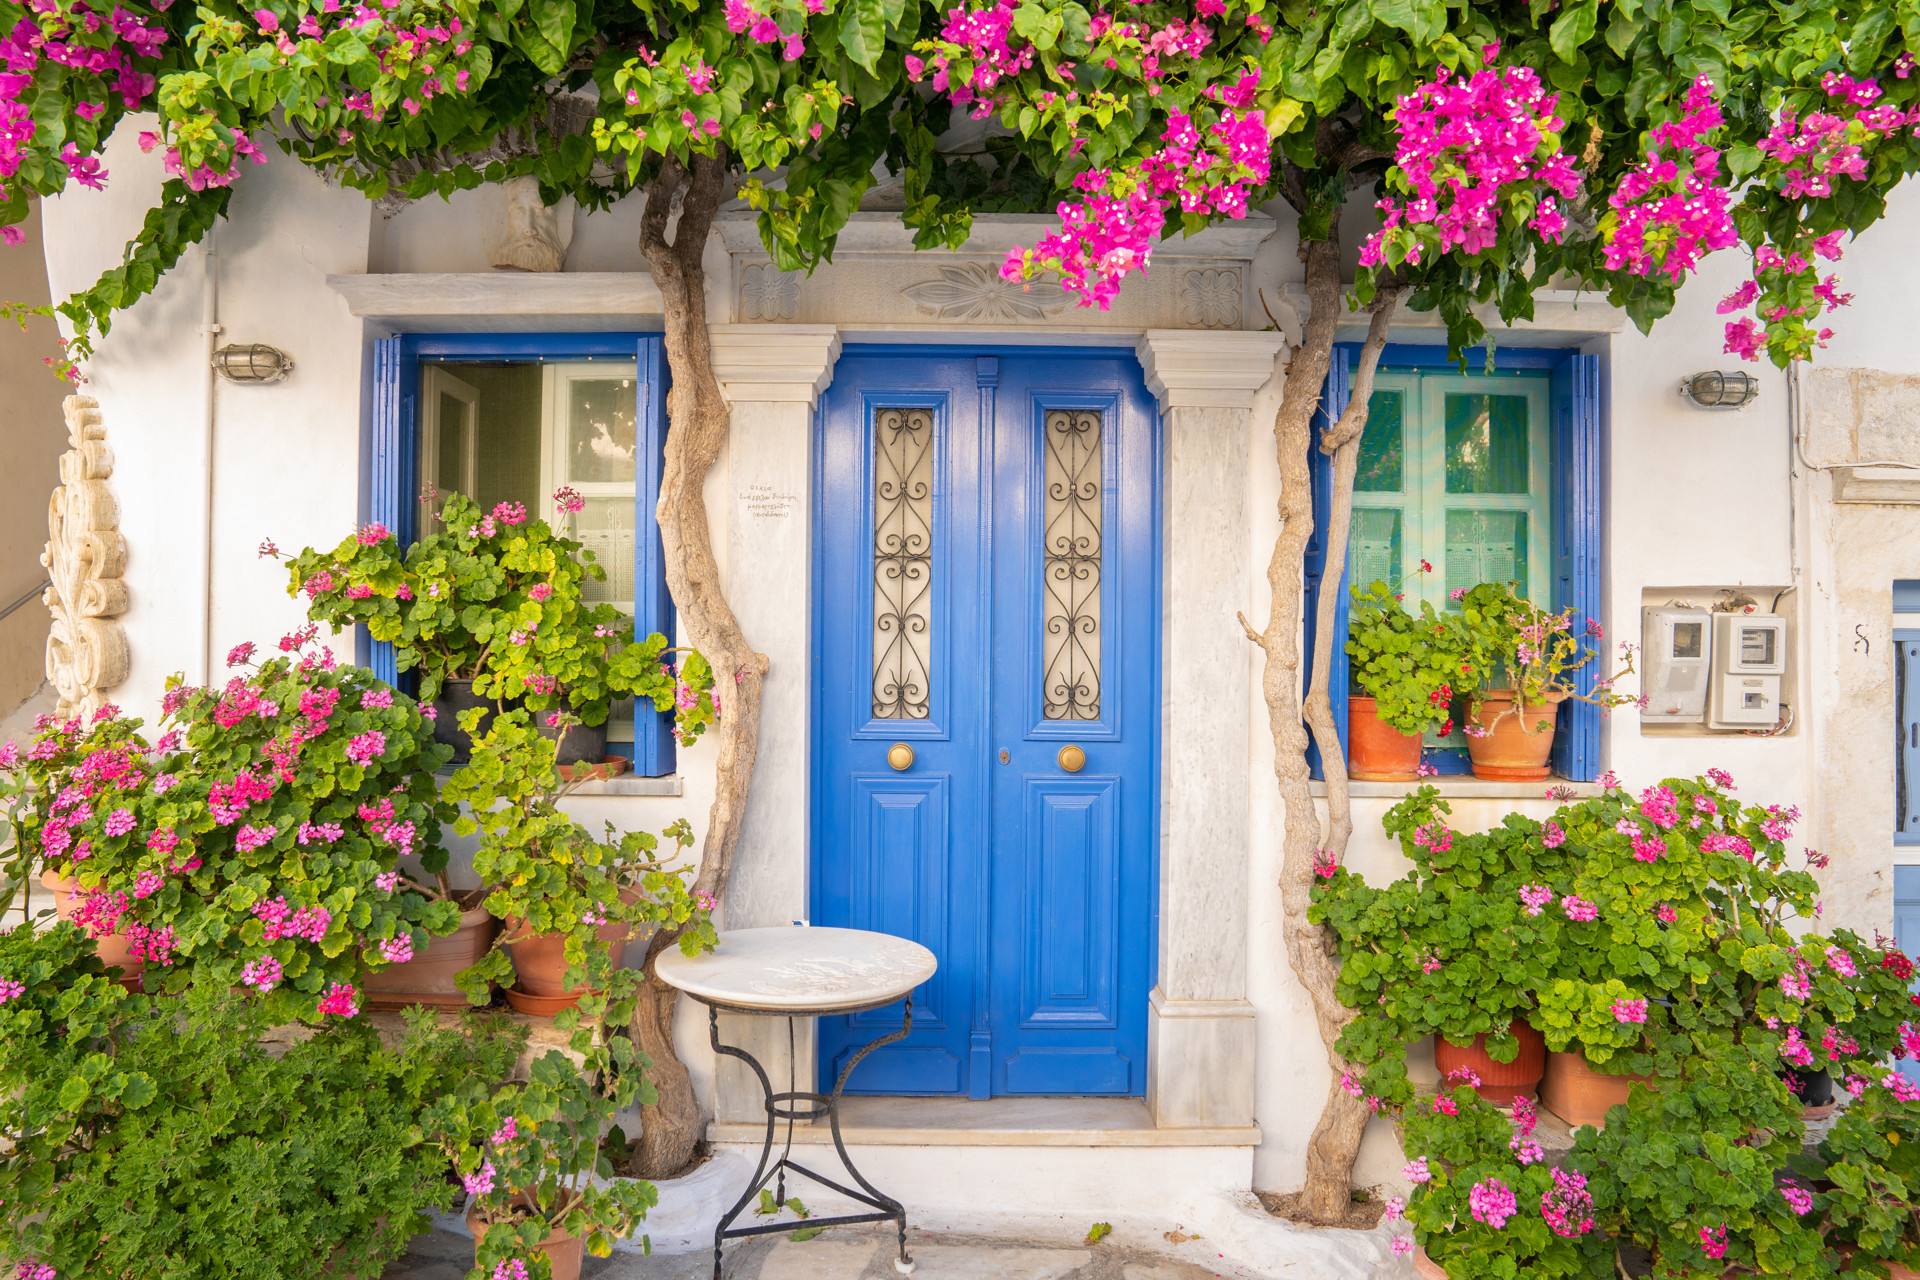 A burst of Cycladic beauty in the villages of Tinos